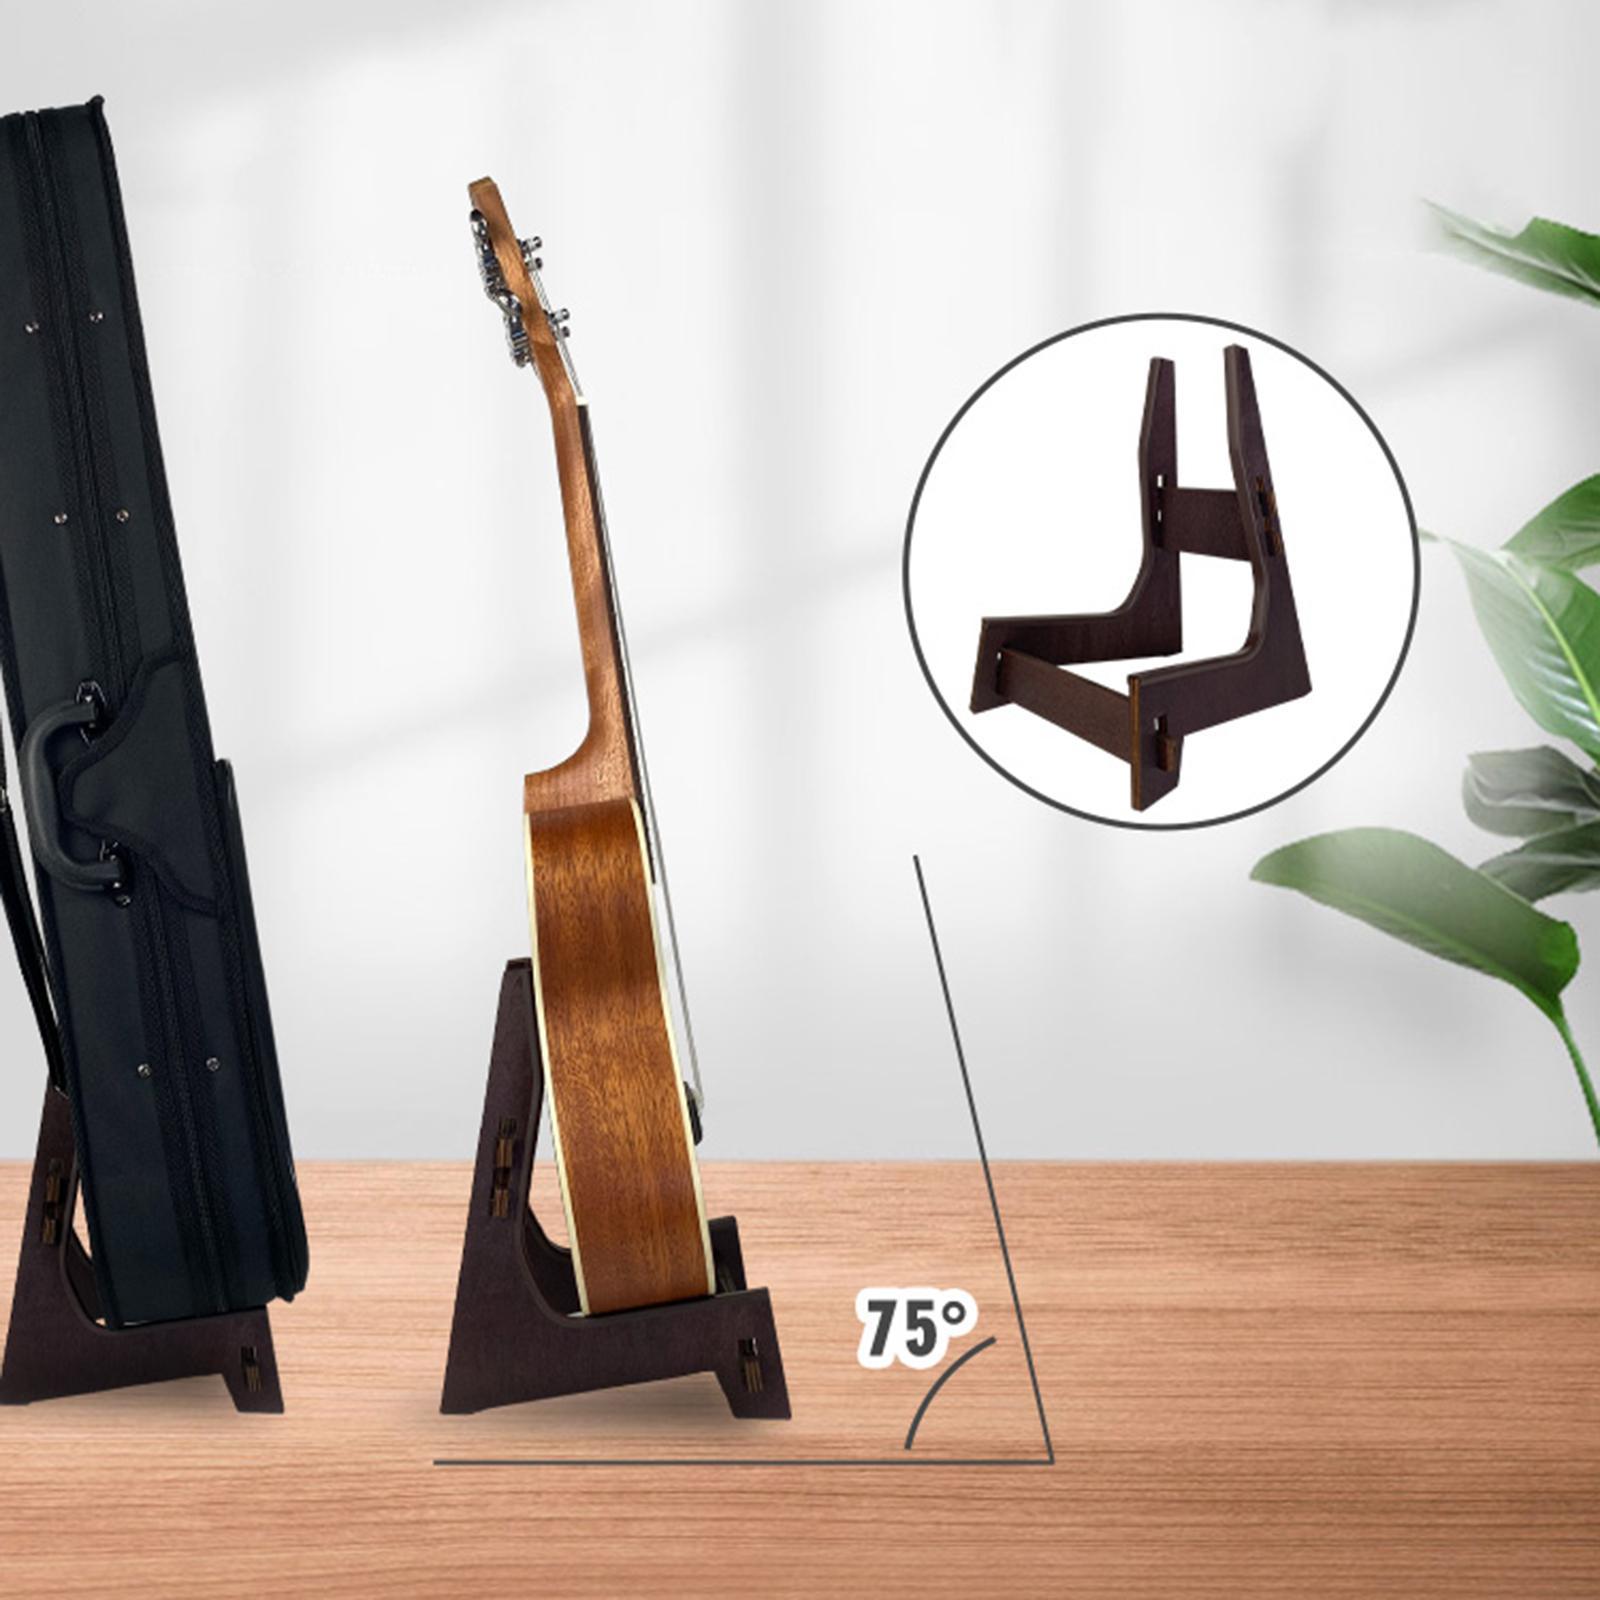 Wood Electric Guitar Floor Stand Ukulele Storage Rack Non Slip Guitar Support Stand for Ukulele Mandolin Bass Guitar Players Gifts Accessory